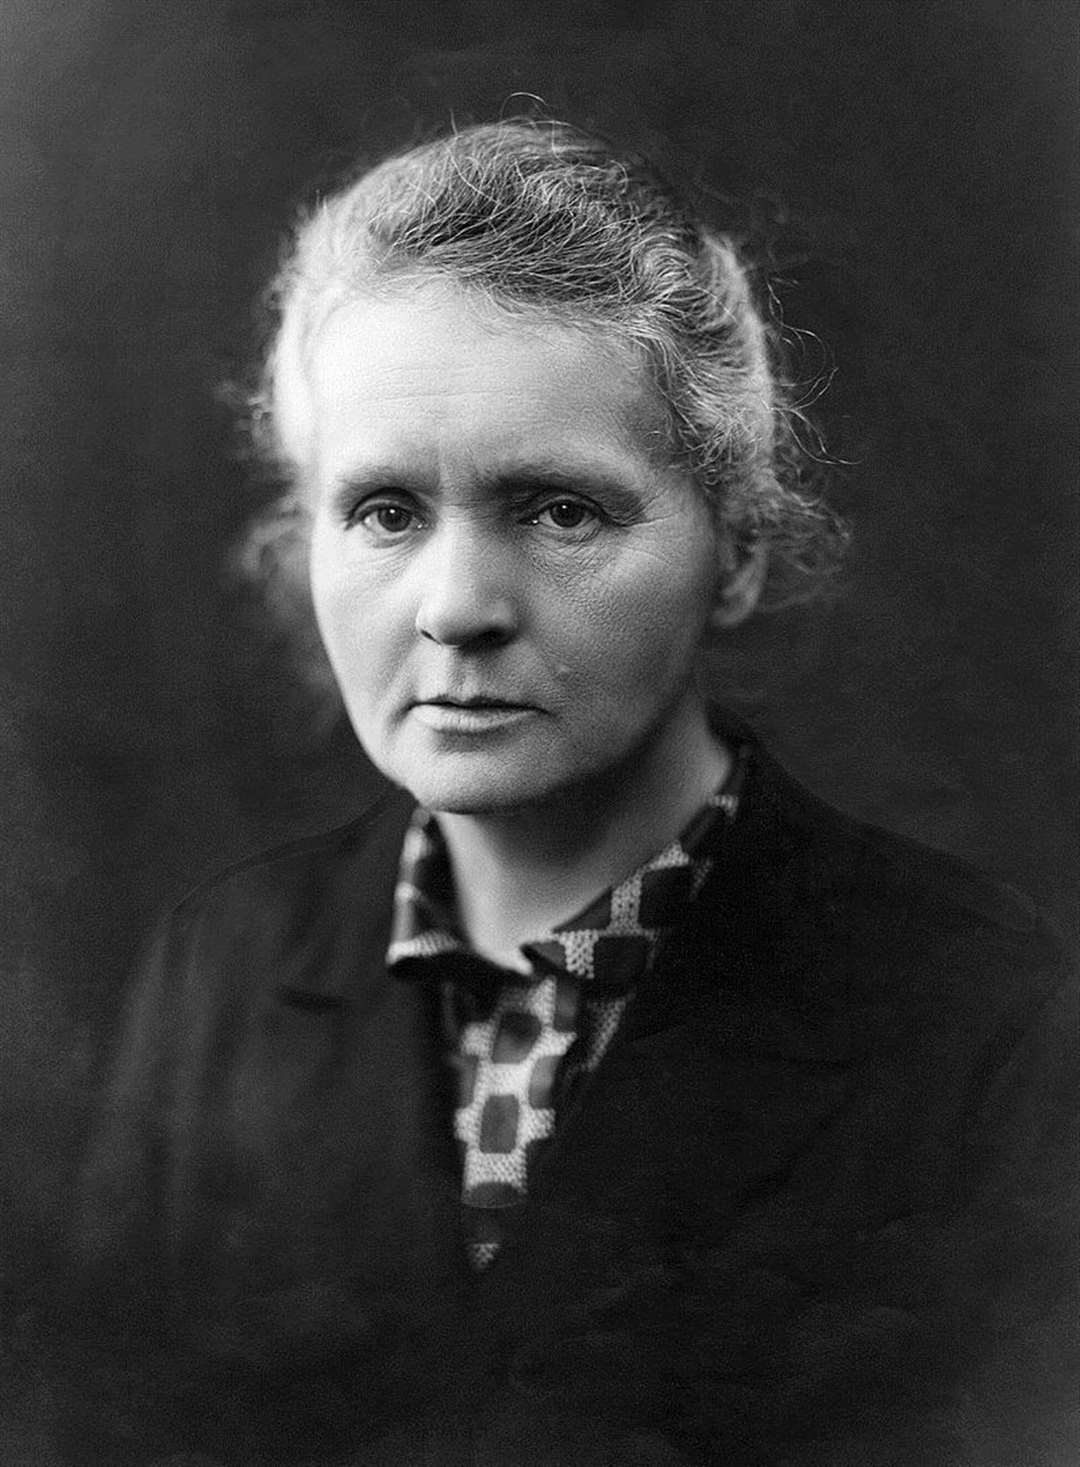 Marie Curie pictured in the 1920s